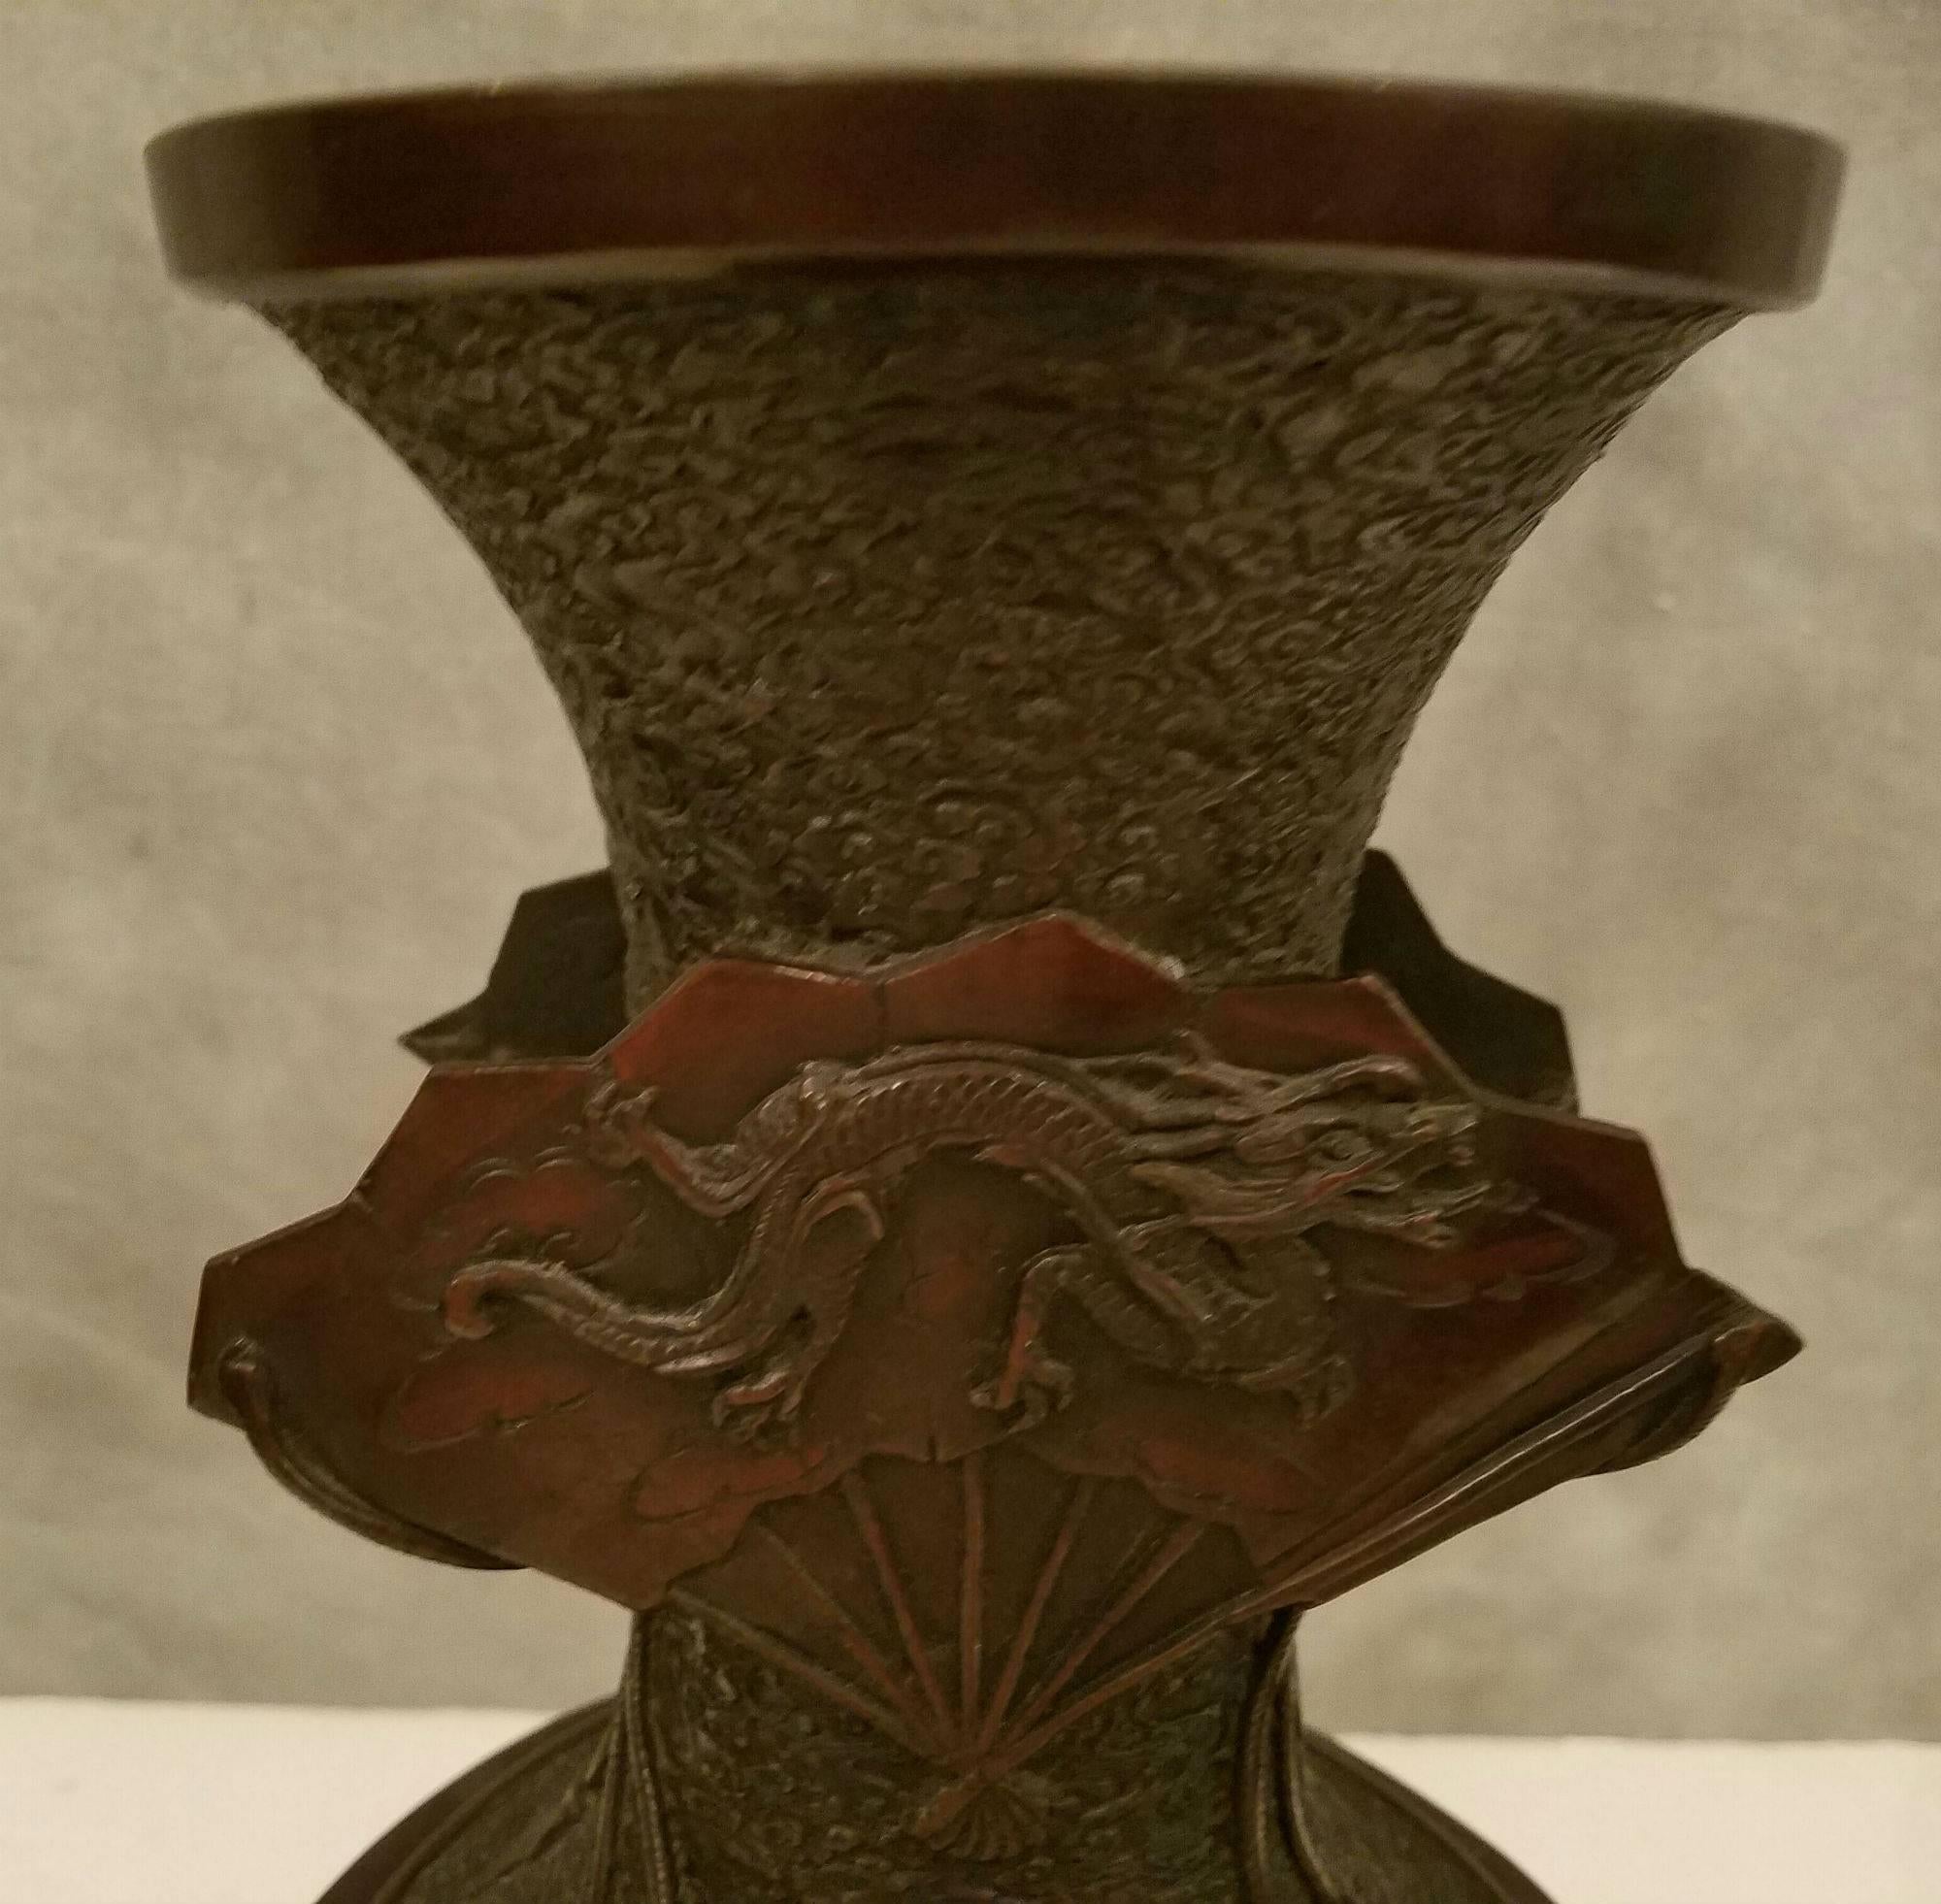 Large Japanese bronze vase, the neck decorated in relief with a fan and dragon the reverse with fan and bird and foliage, the body fans and birds and foliage.